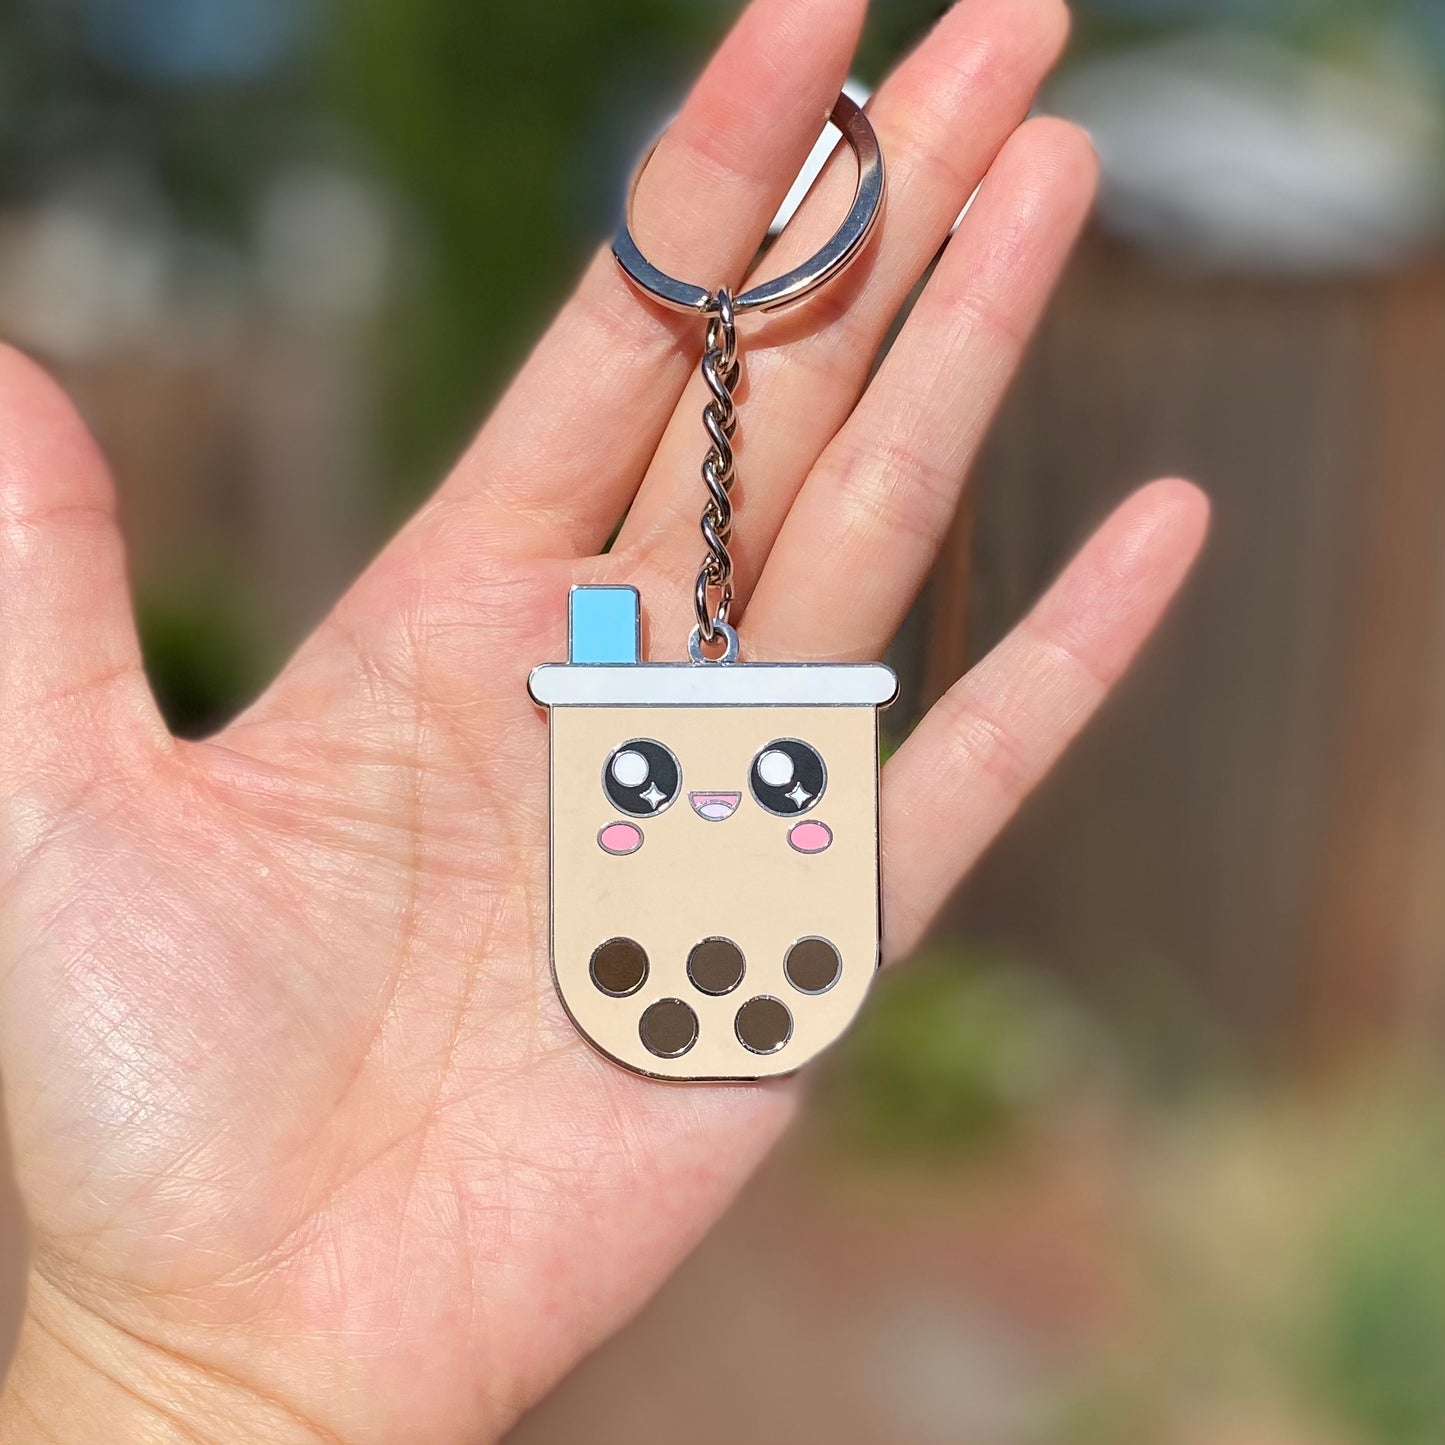 Enamel keychain held by a woman's hand. The keychain features a boba drink character with a cheerful face, a tapioca pearl-filled drink cup, and a blue wide straw.